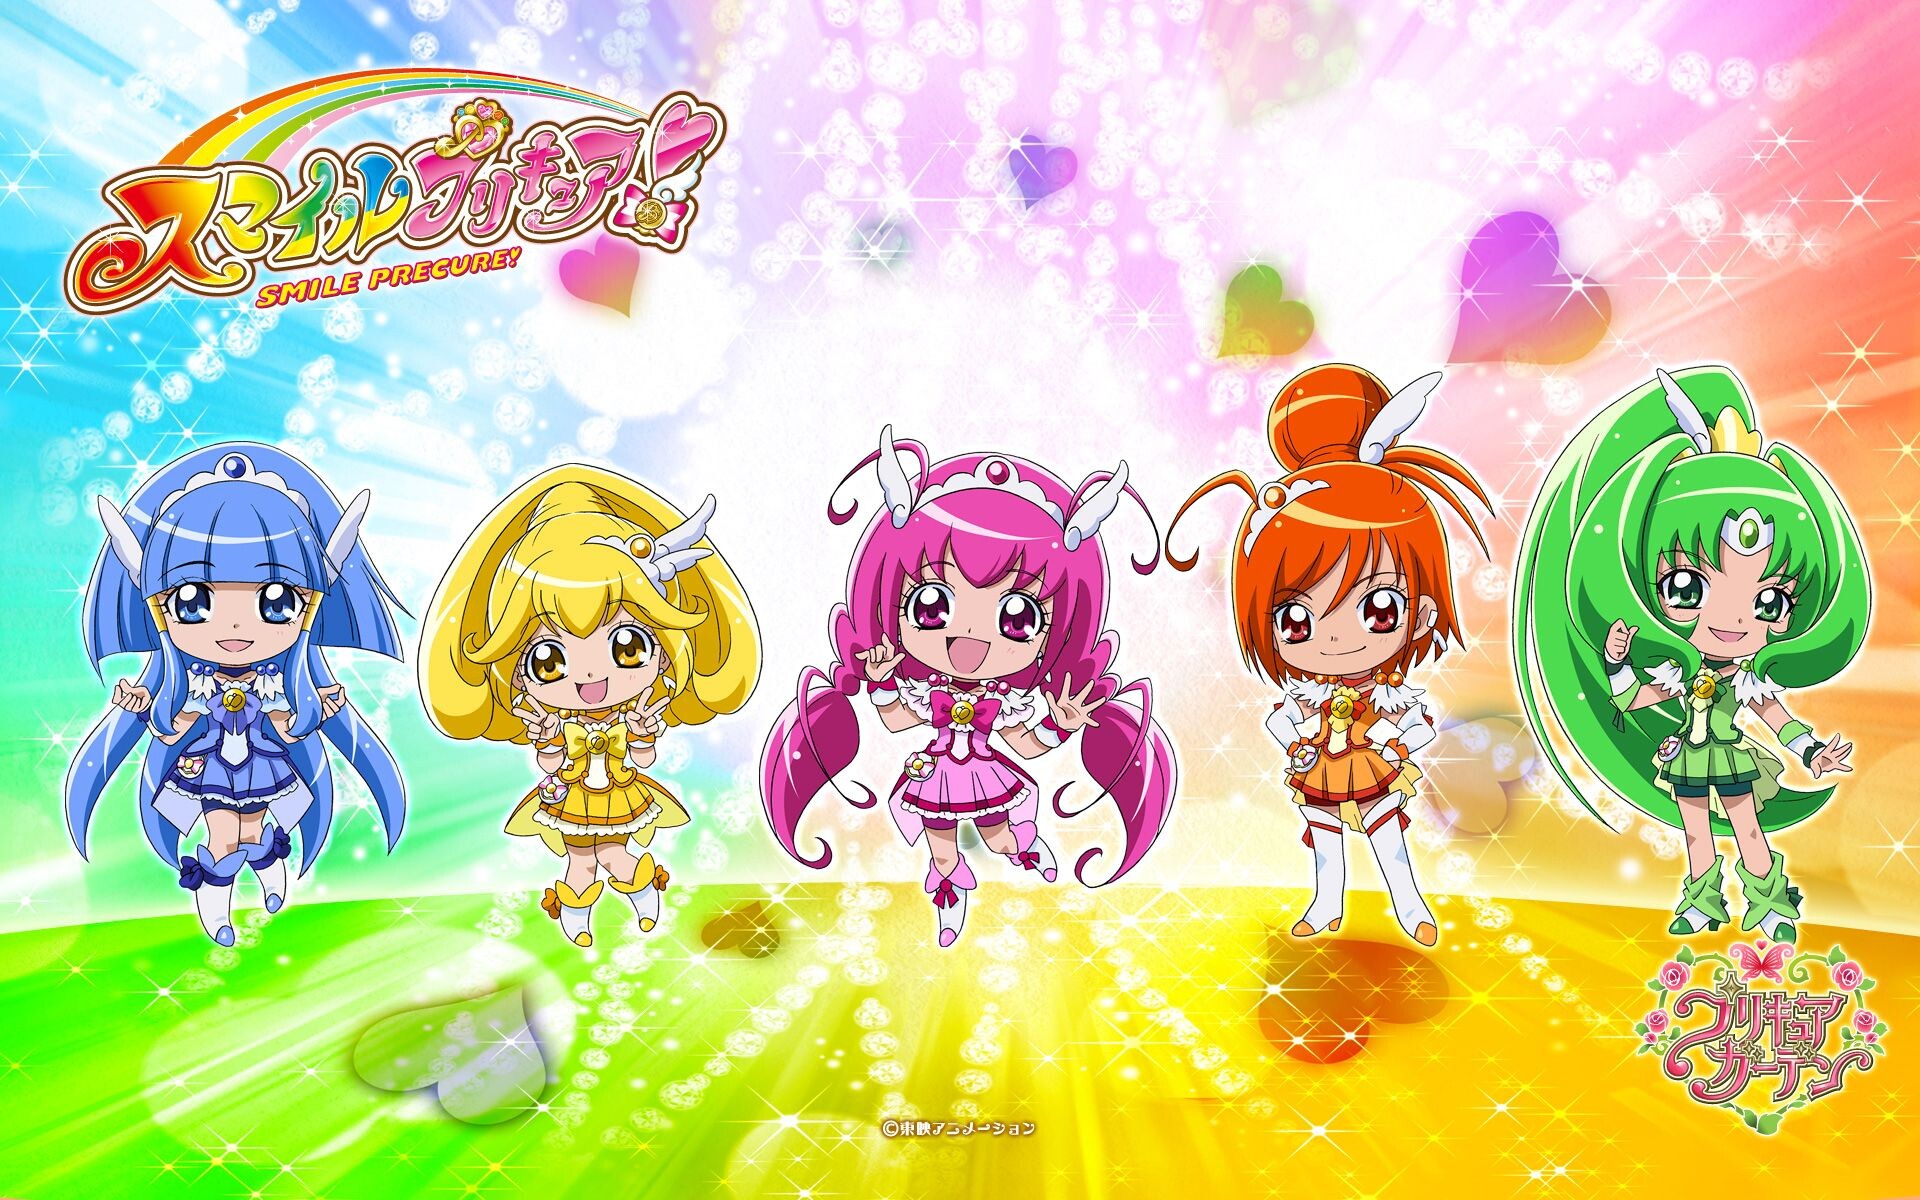 Glitter Force: Pretty Cures, Japanese magical girl anime franchise, Poster. 1920x1200 HD Wallpaper.